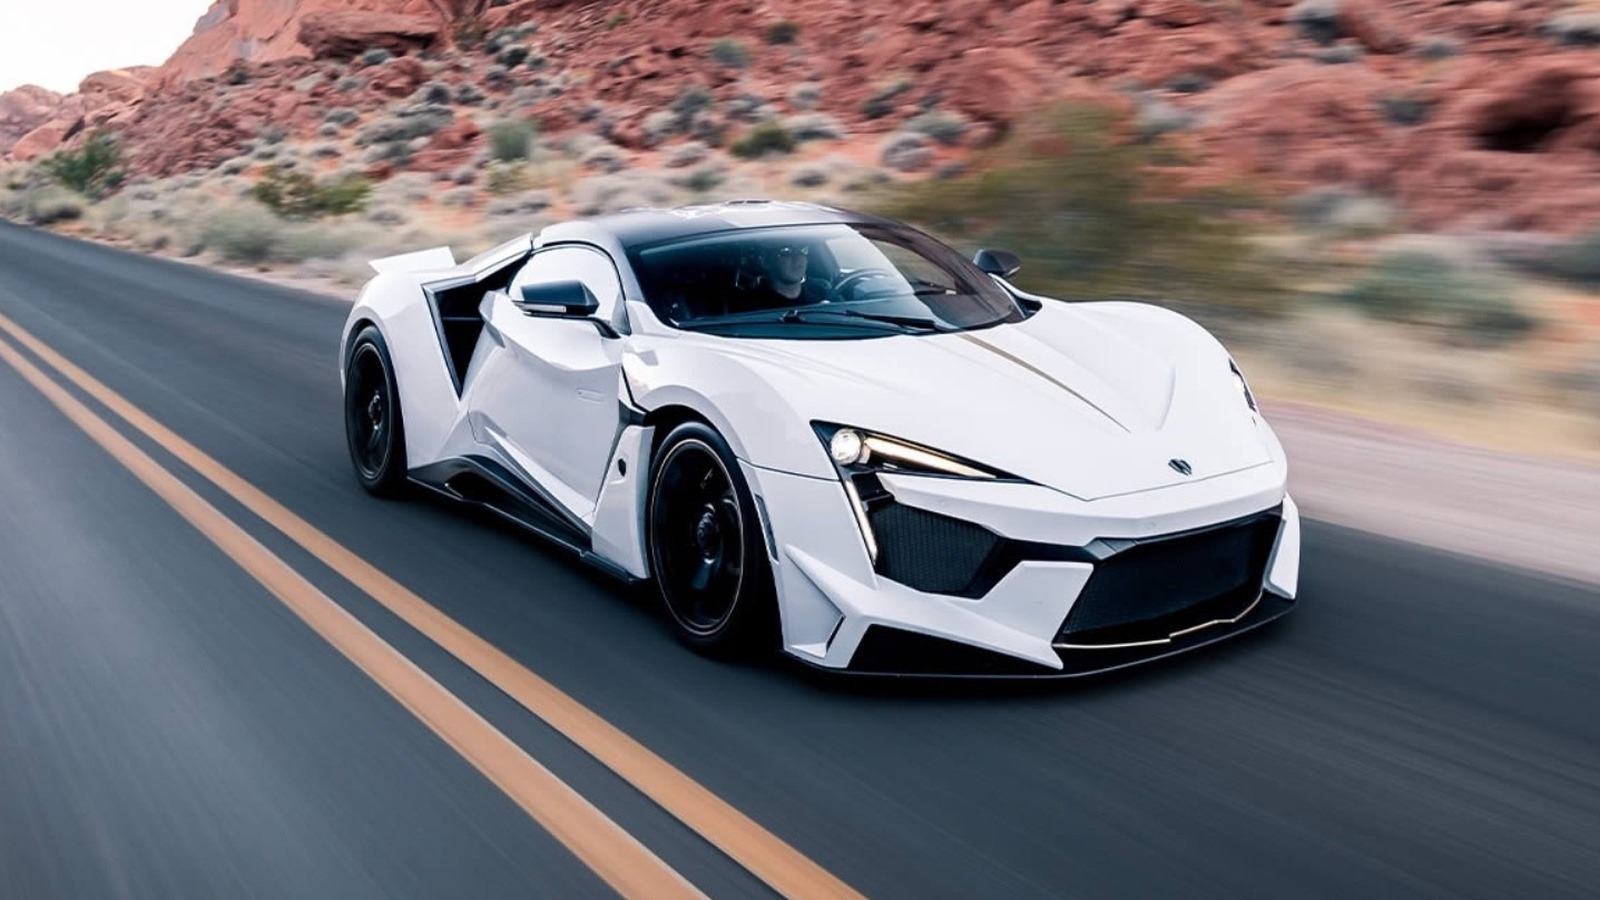 The Lykan Hypersport paved the way for the Fenyr Supersport